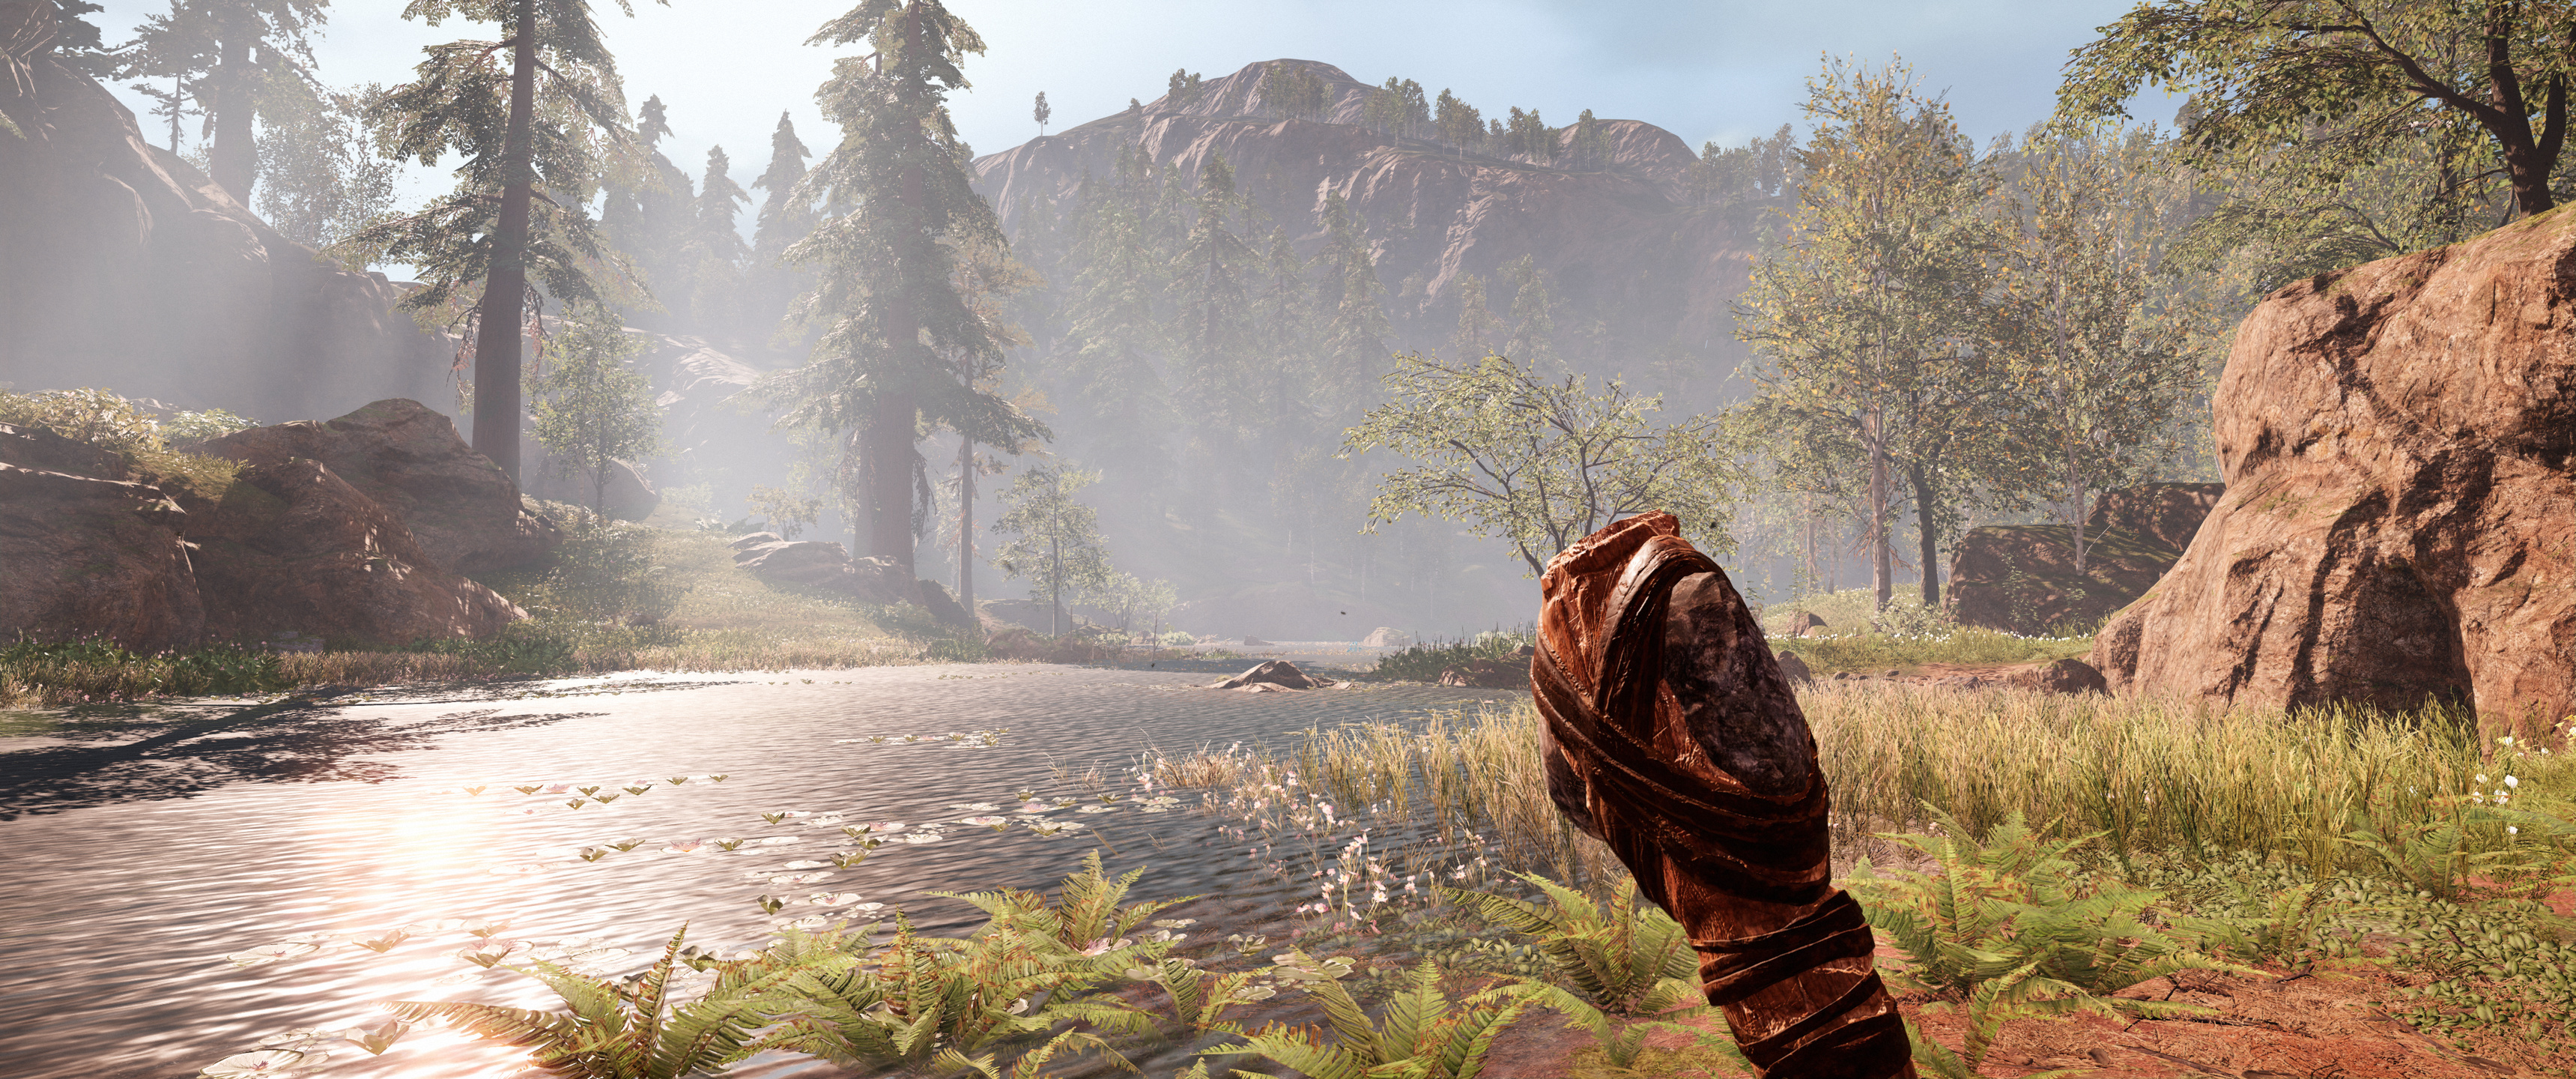 Far Cry Primal Backgrounds, Pictures, Images